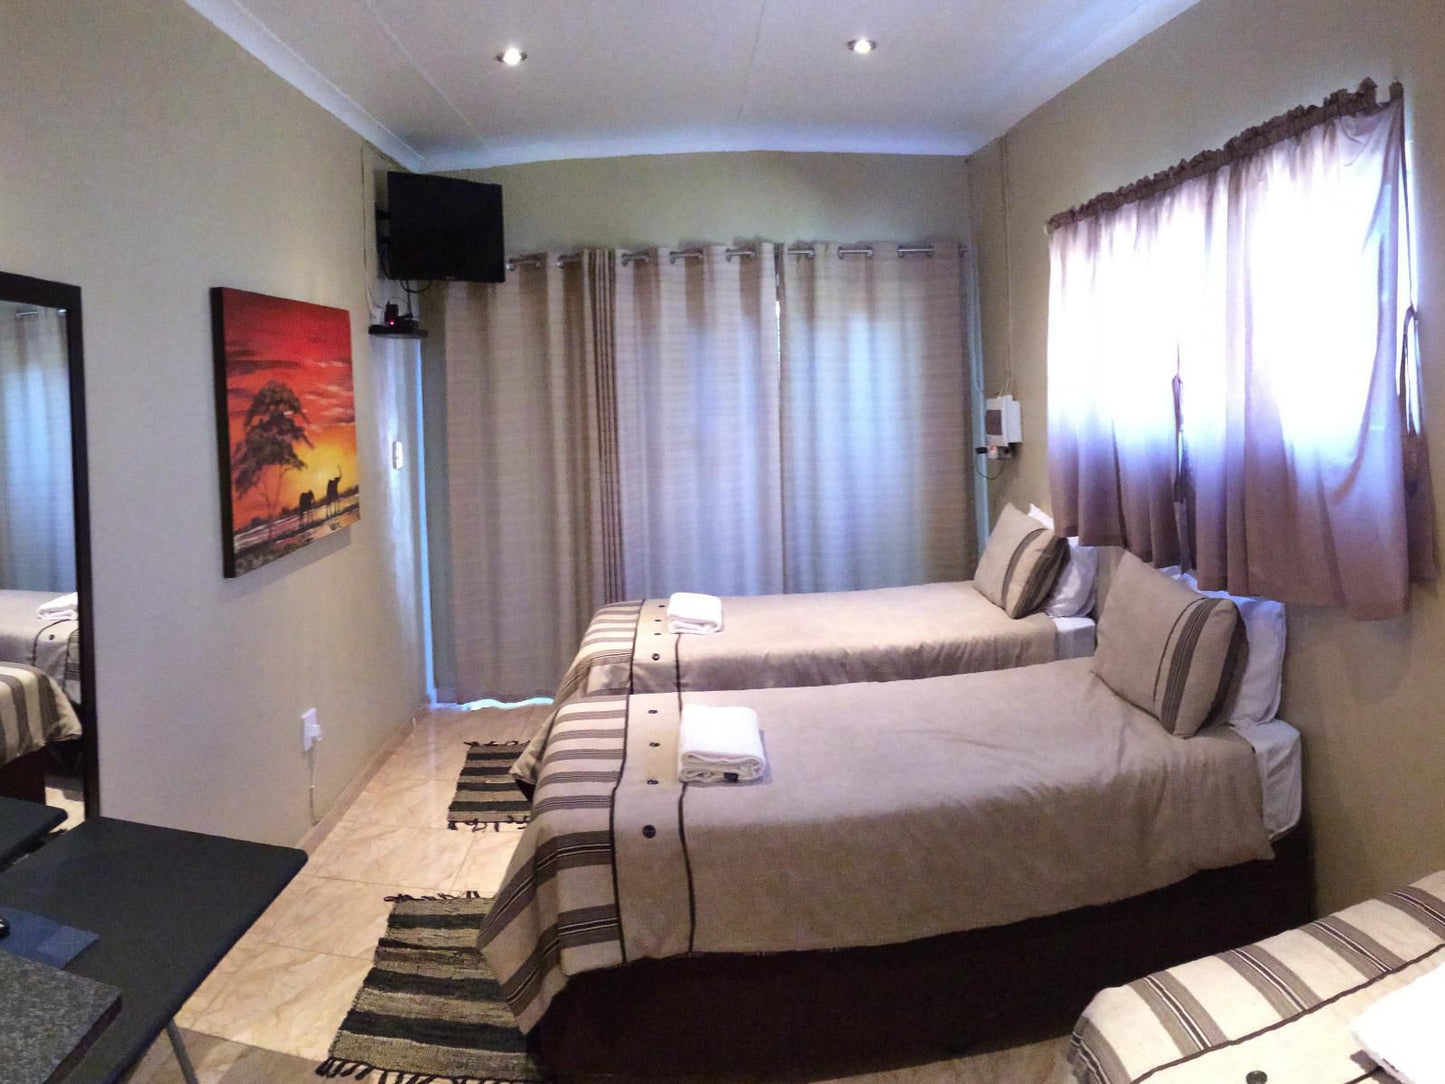 The Willow Guesthouse Fauna Park Polokwane Pietersburg Limpopo Province South Africa Bedroom